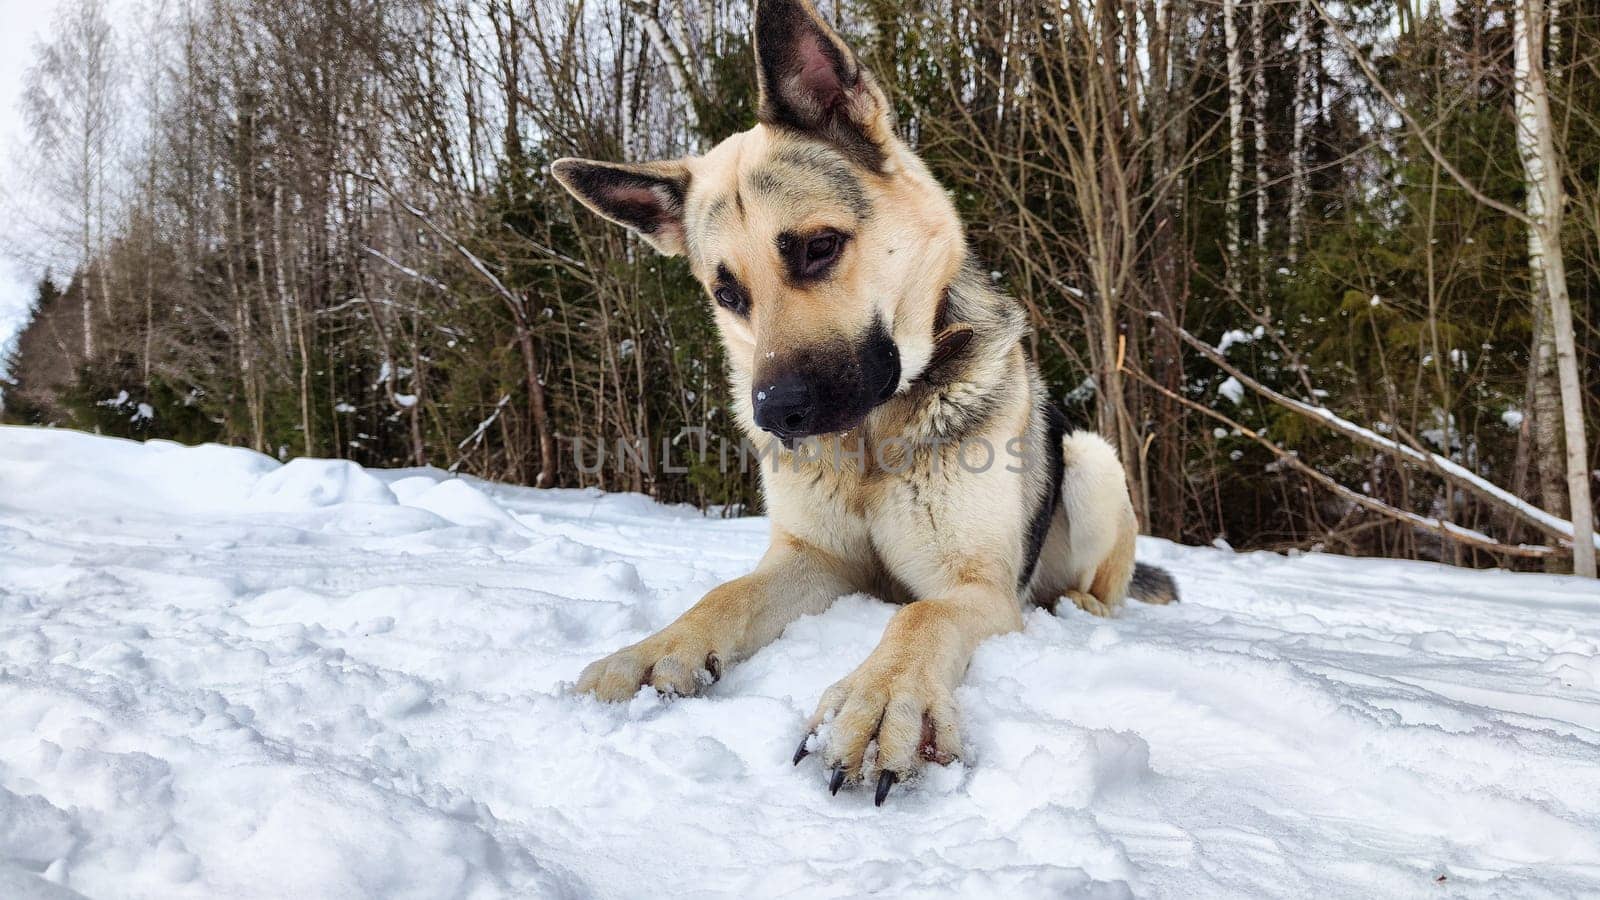 Dog German Shepherd in winter day and white snow arround. Waiting eastern European dog veo in cold weather